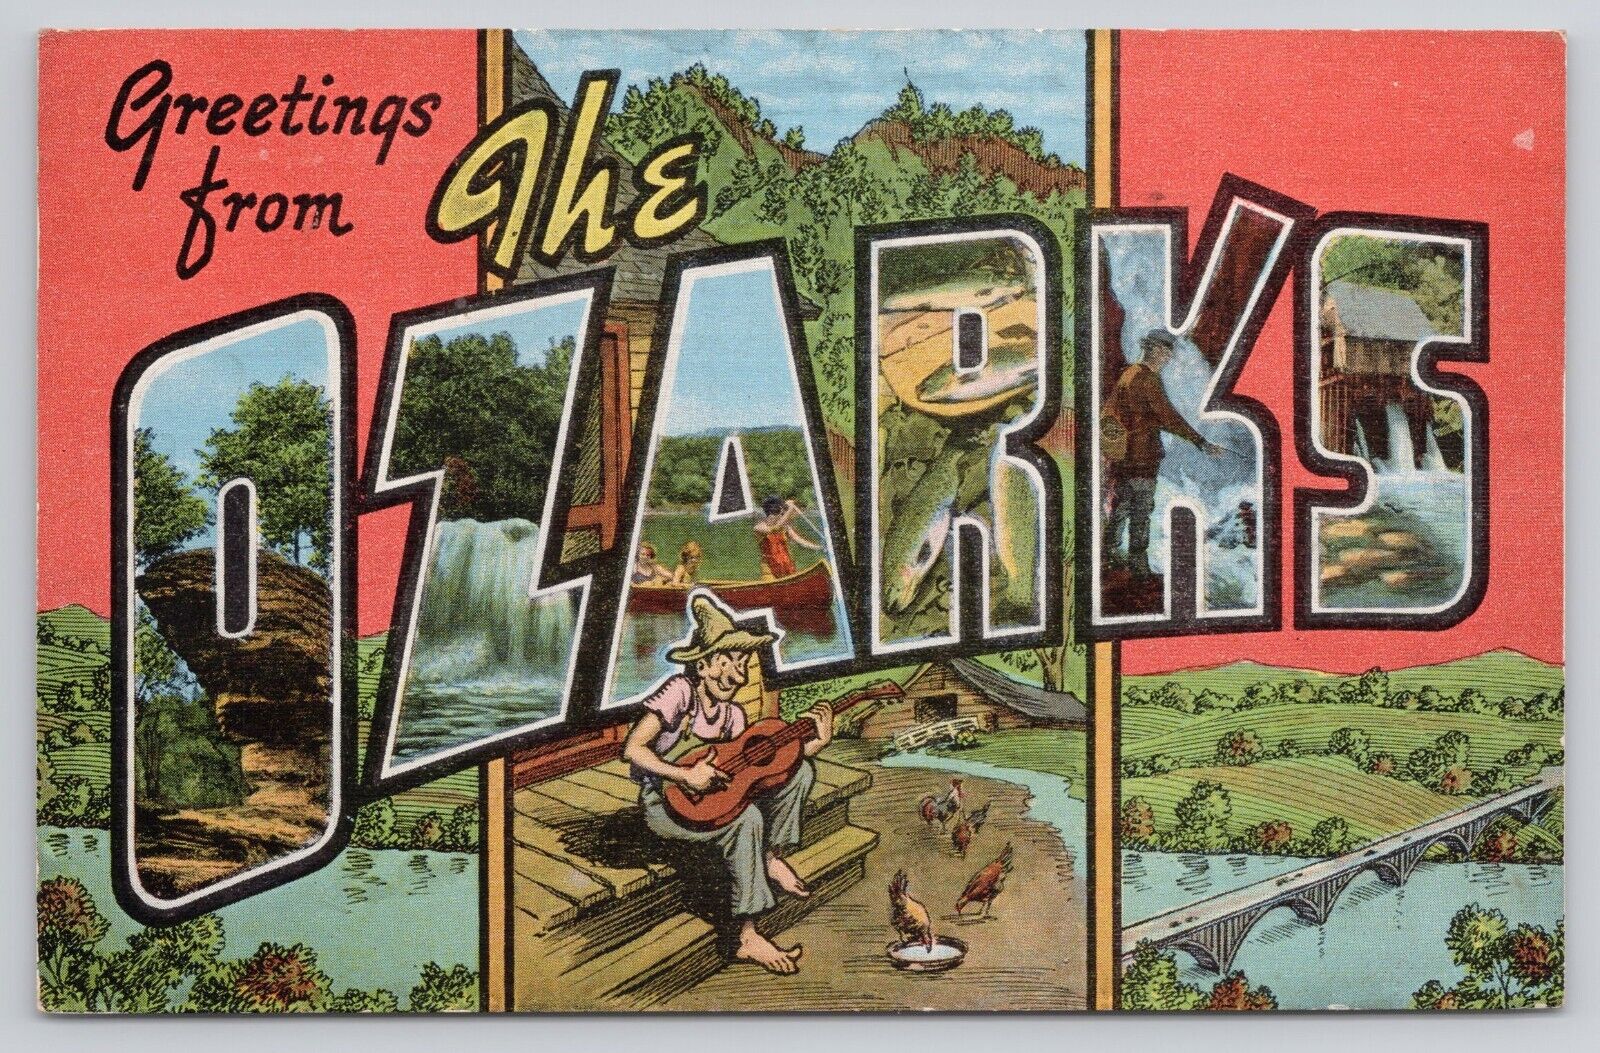 Greetings from the Ozarks Large Letters 1950 Postcard